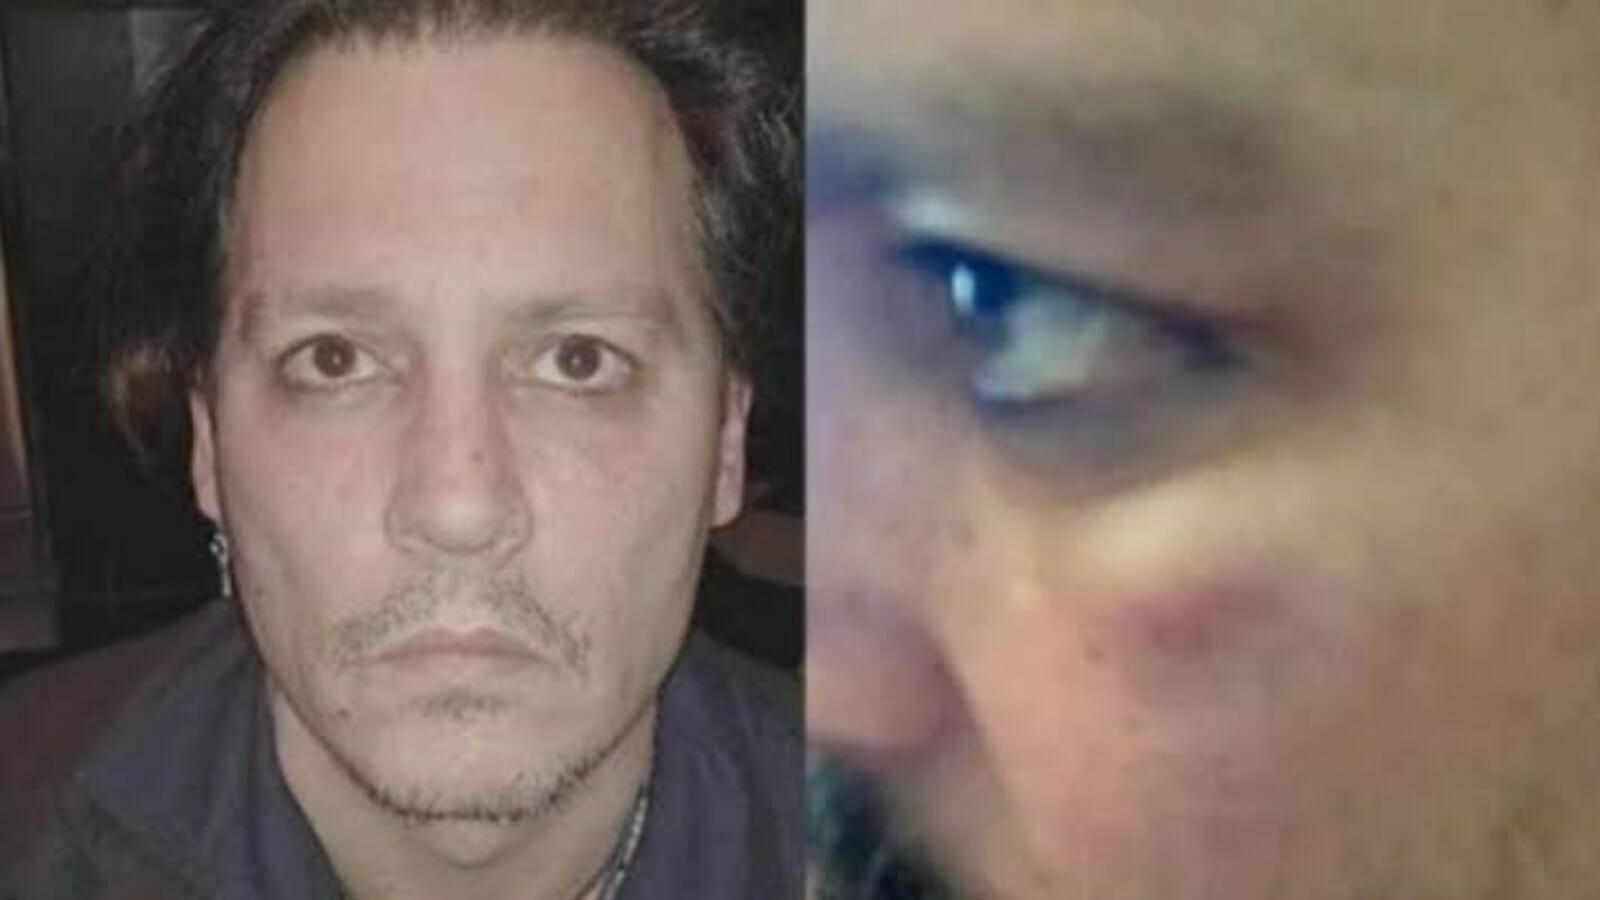 Johnny Depp's bruised face photo presented in the court